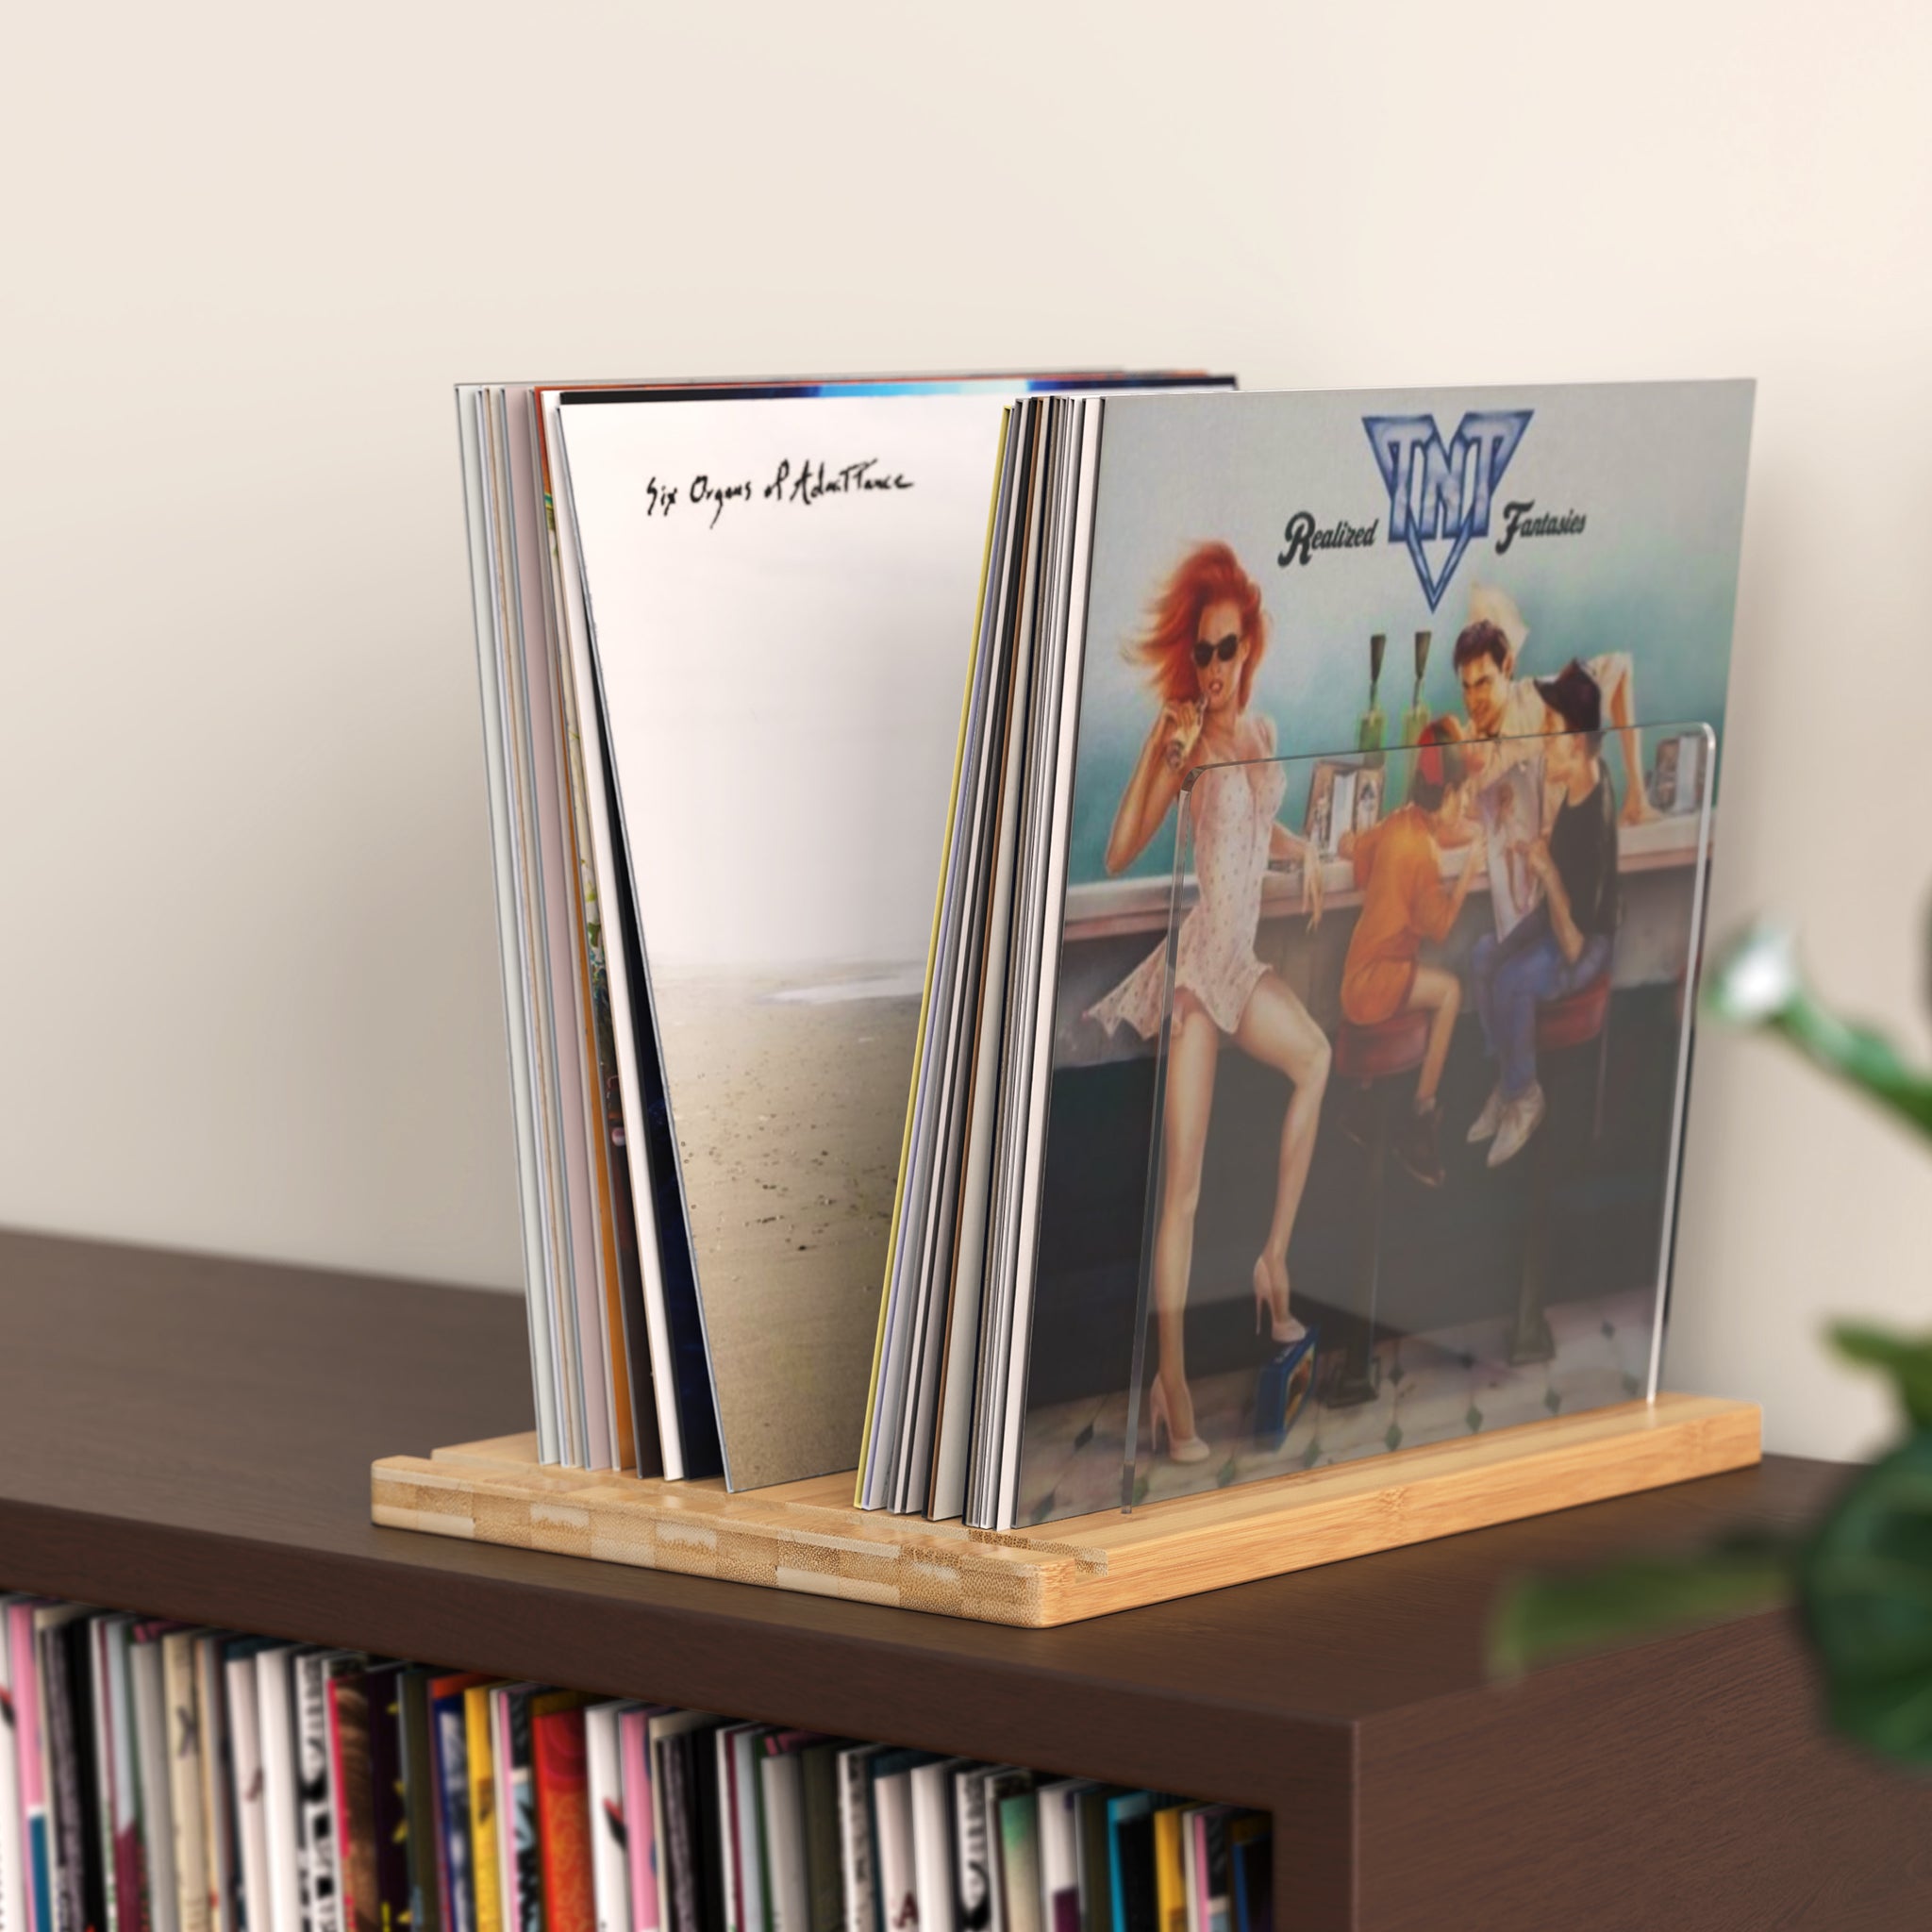 TAKMORK Record Storage Holder is made of high density transparent acrylic sheet with thick bamboo material，The vinyl records holder measures approximately 11 x 14.57 x 9.84 inches，enough to hold about 45 records without worrying about tipping.The simple yet elegant combination of natural wood and clear acrylic ensures it complements various home decoration styles. 